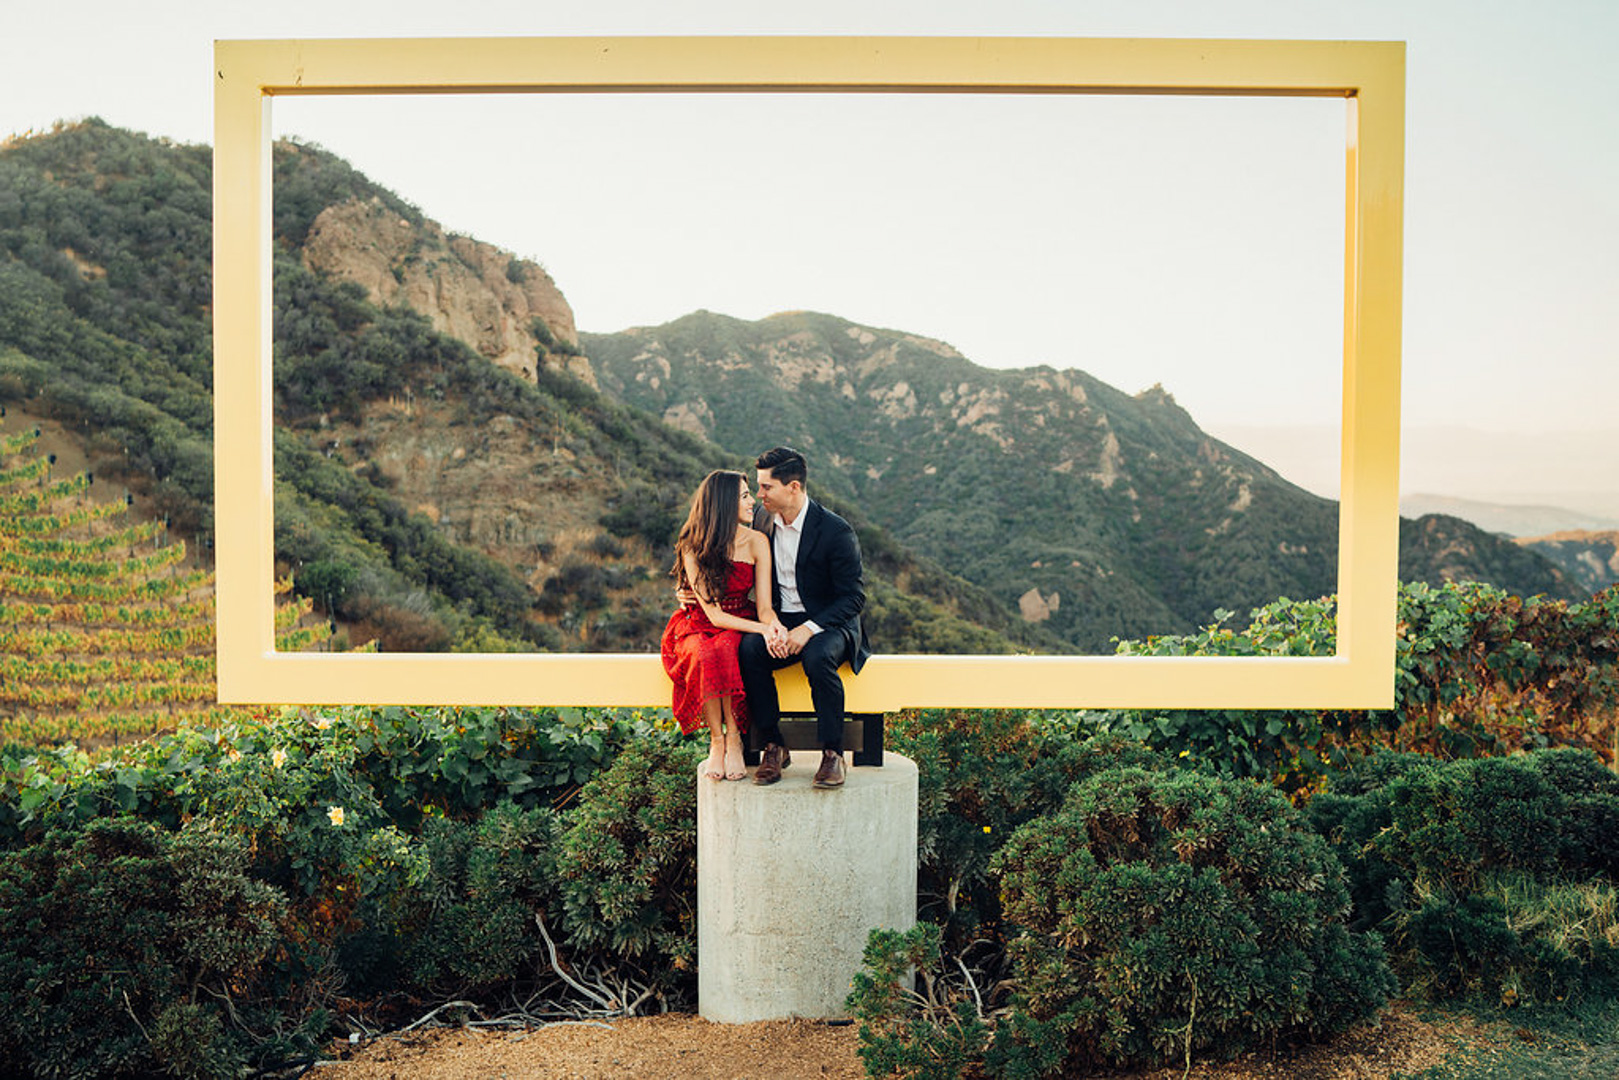 Jackie and Luke take engagement pictures at a vineyard in Malibu. 